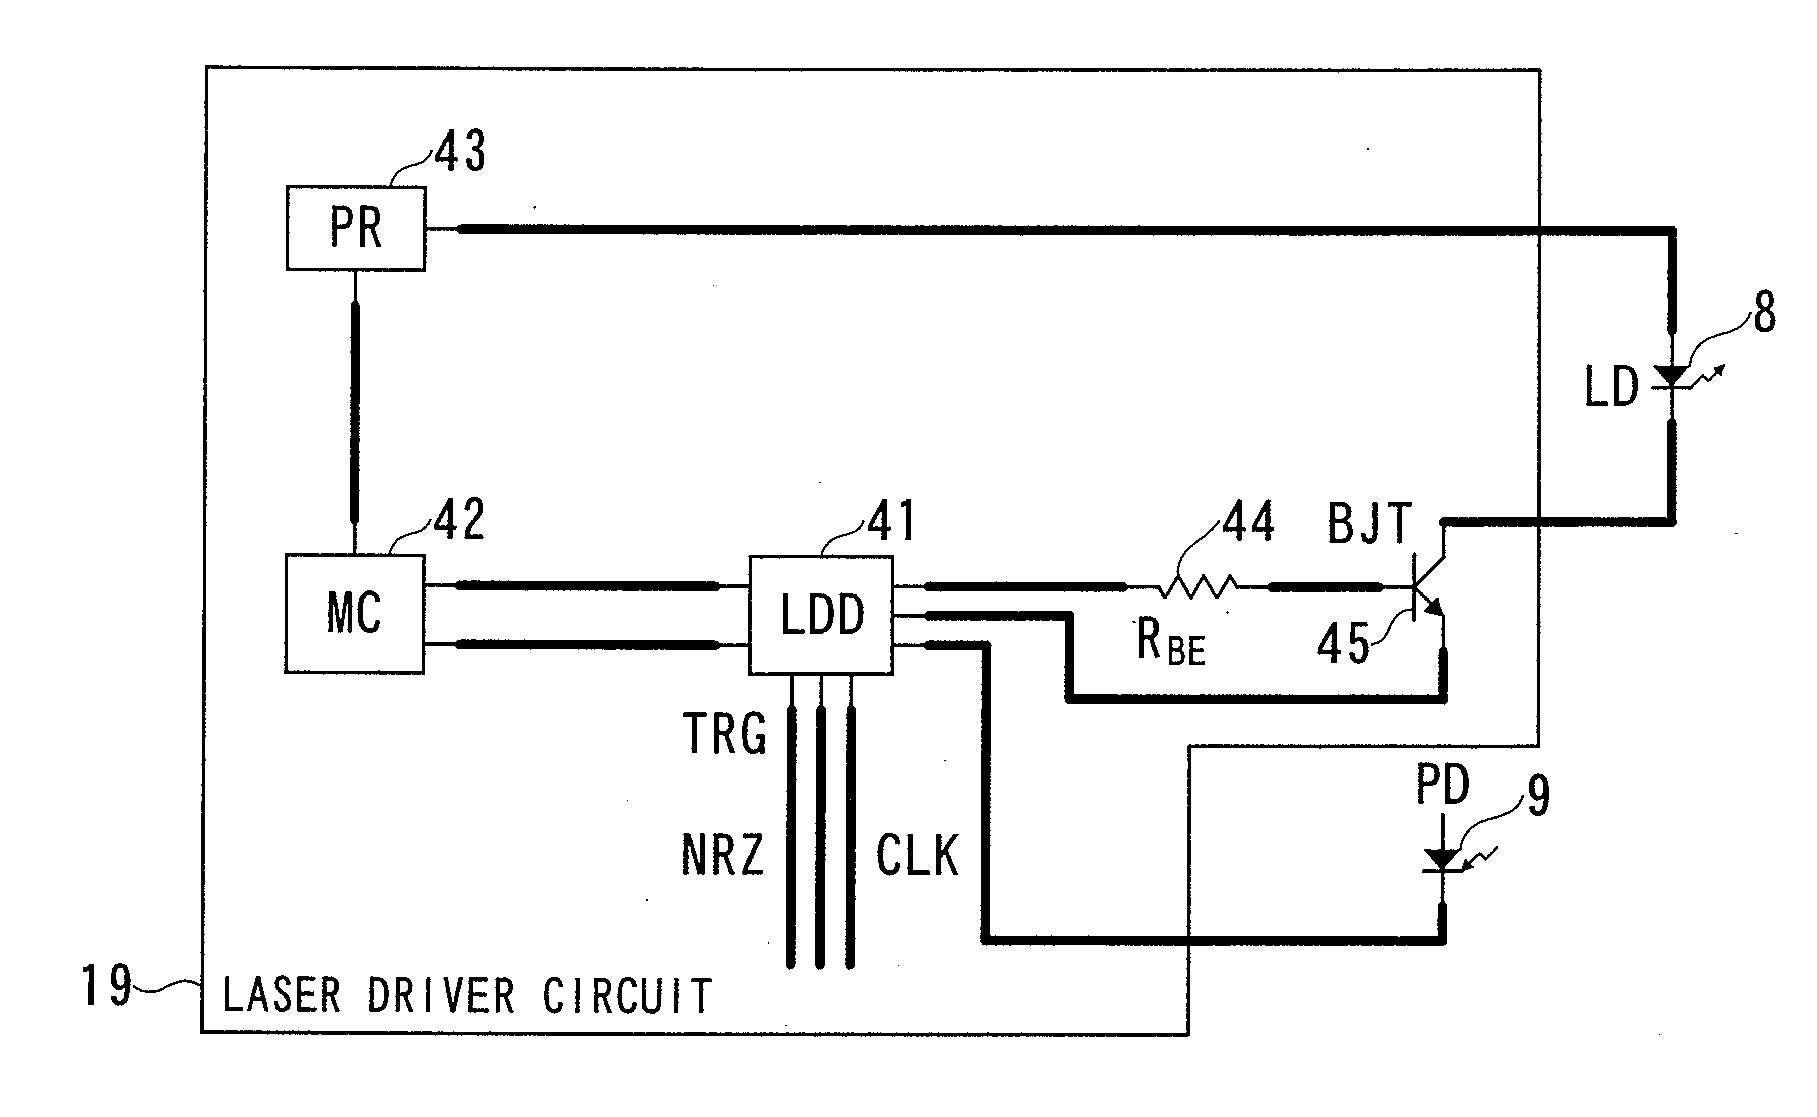 Laser Driver Circuit and Optical Disc Apparatus Having the Laser Driver Circuit